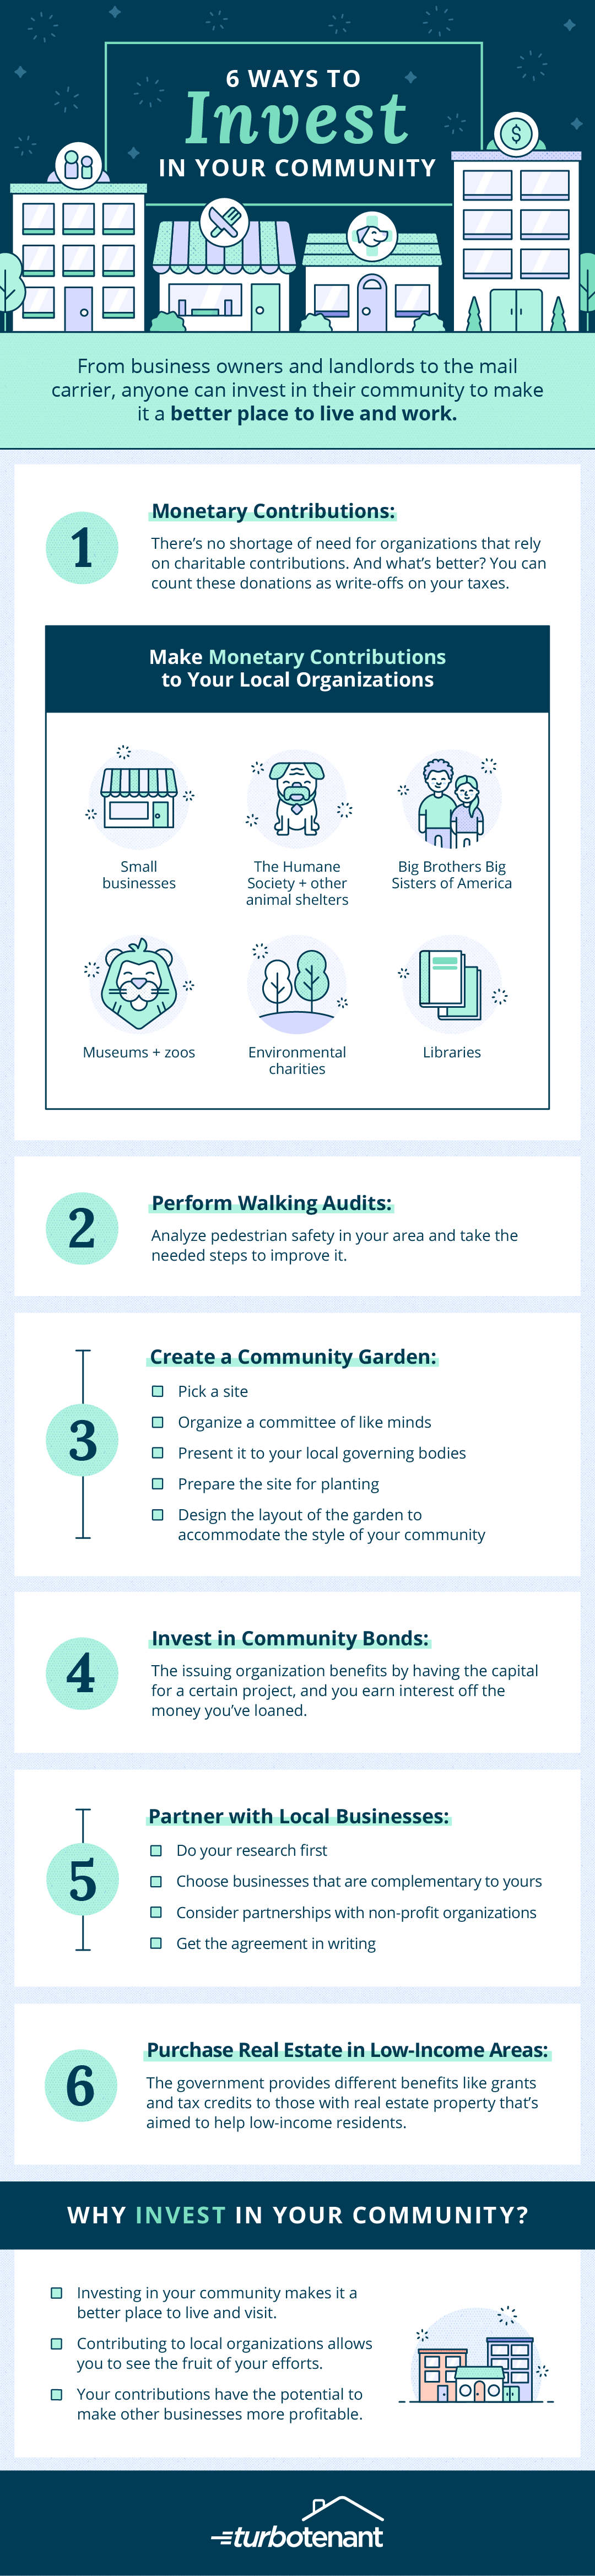 6 ways to reinvest rental earnings into your community illustrated infographic